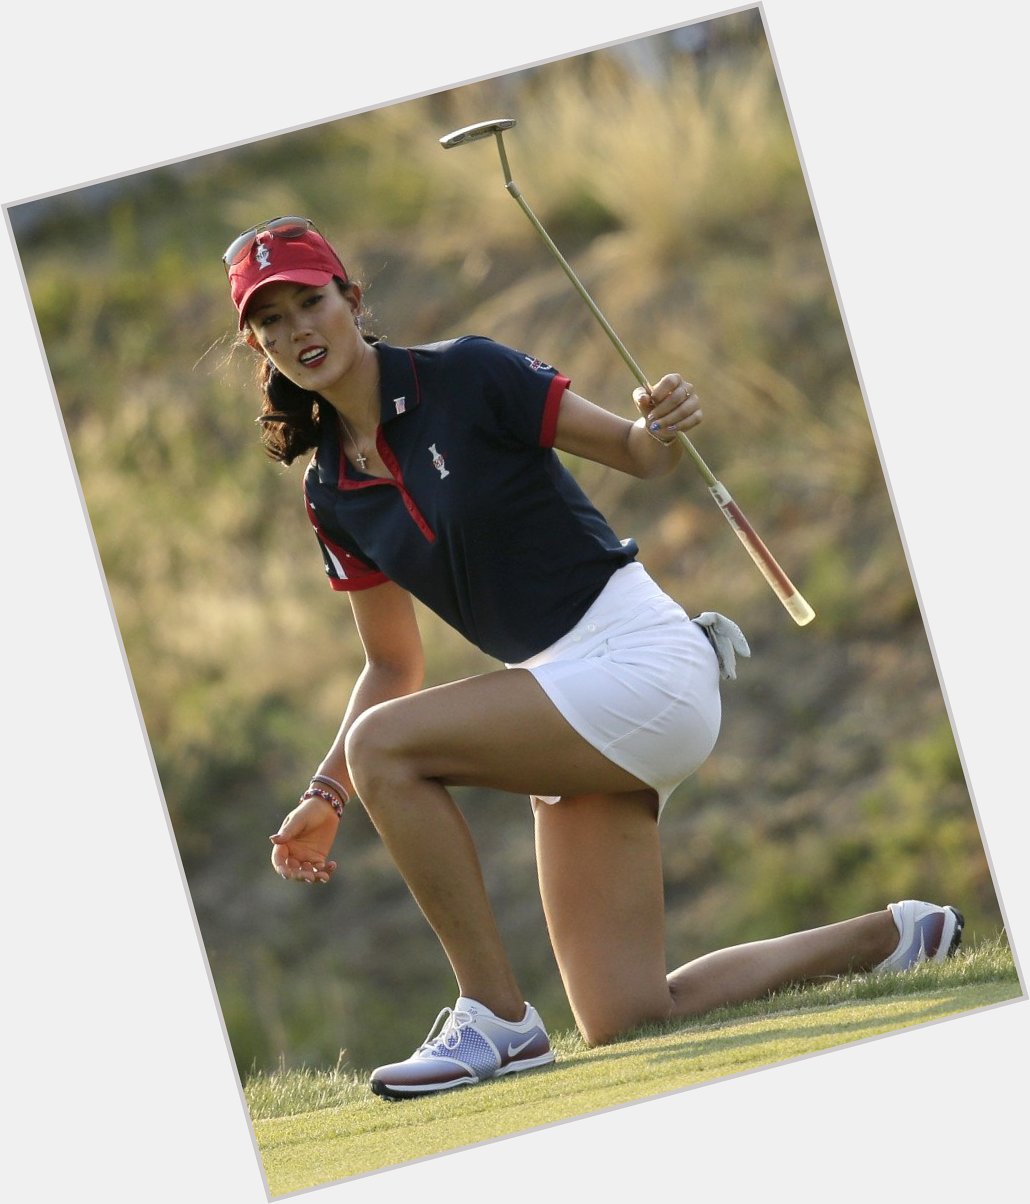 Happy Birthday to Michelle Wie who turns 28 today! 